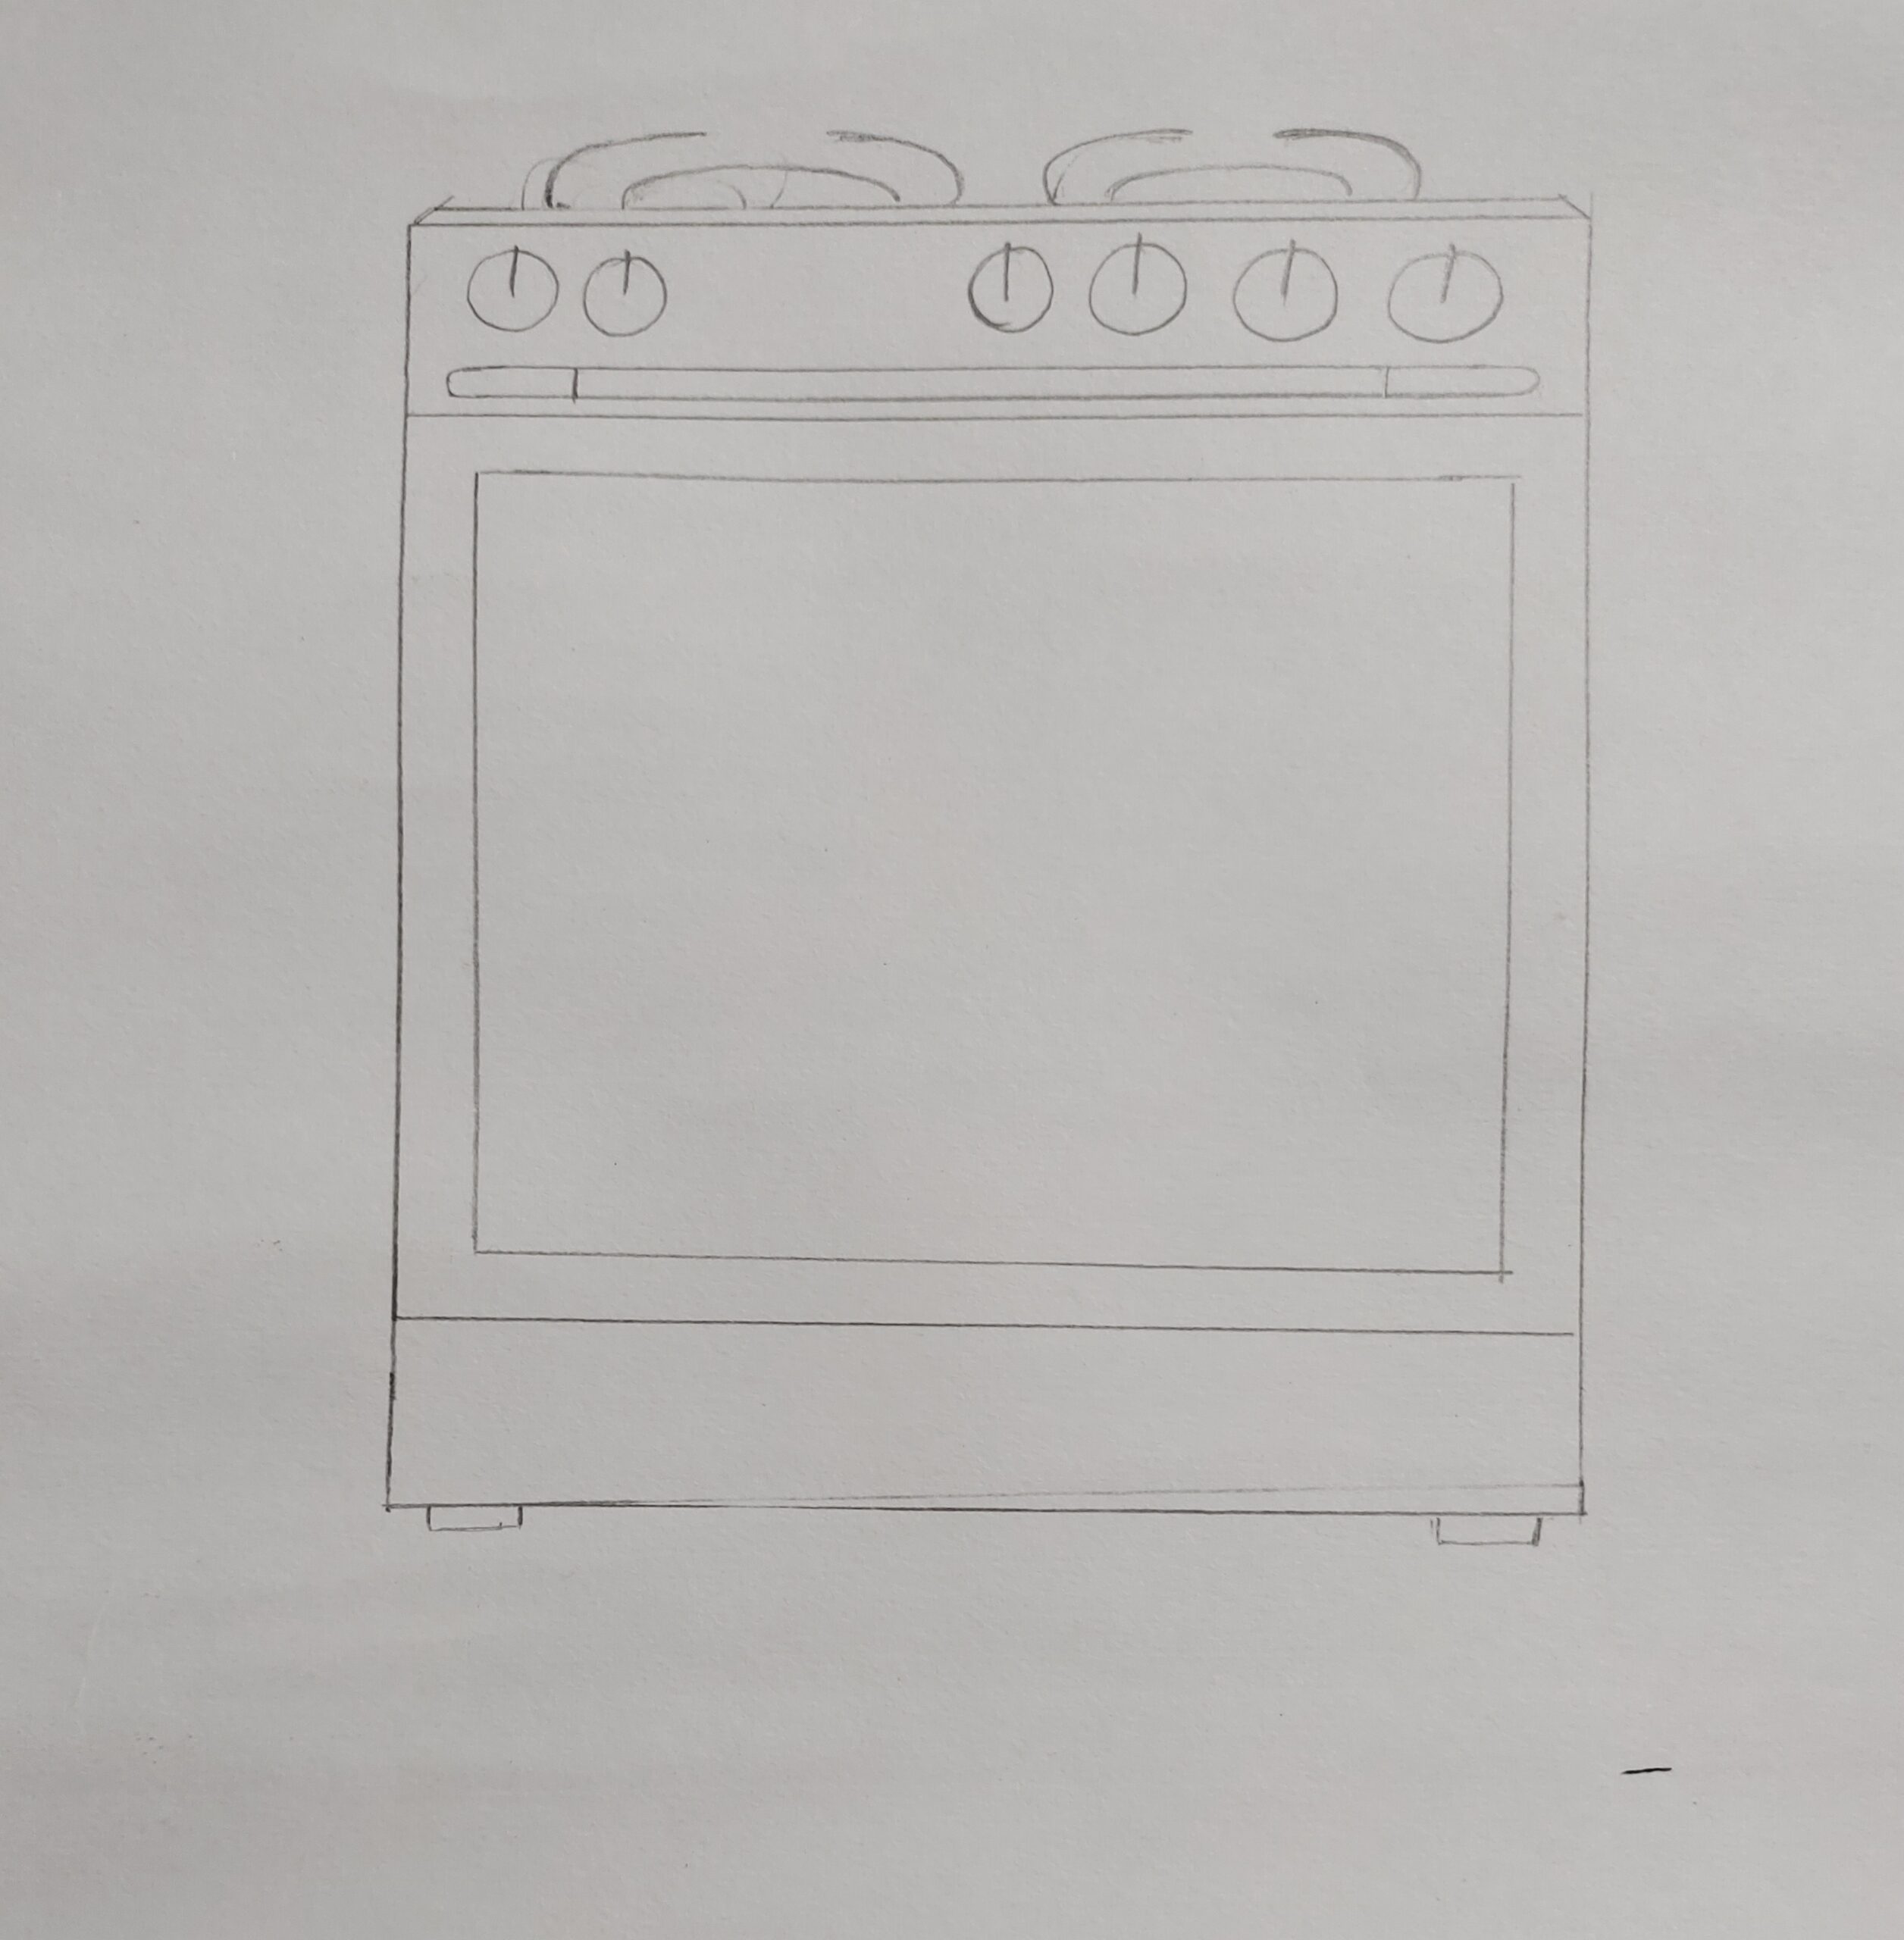 How to draw a Stove Step by Step